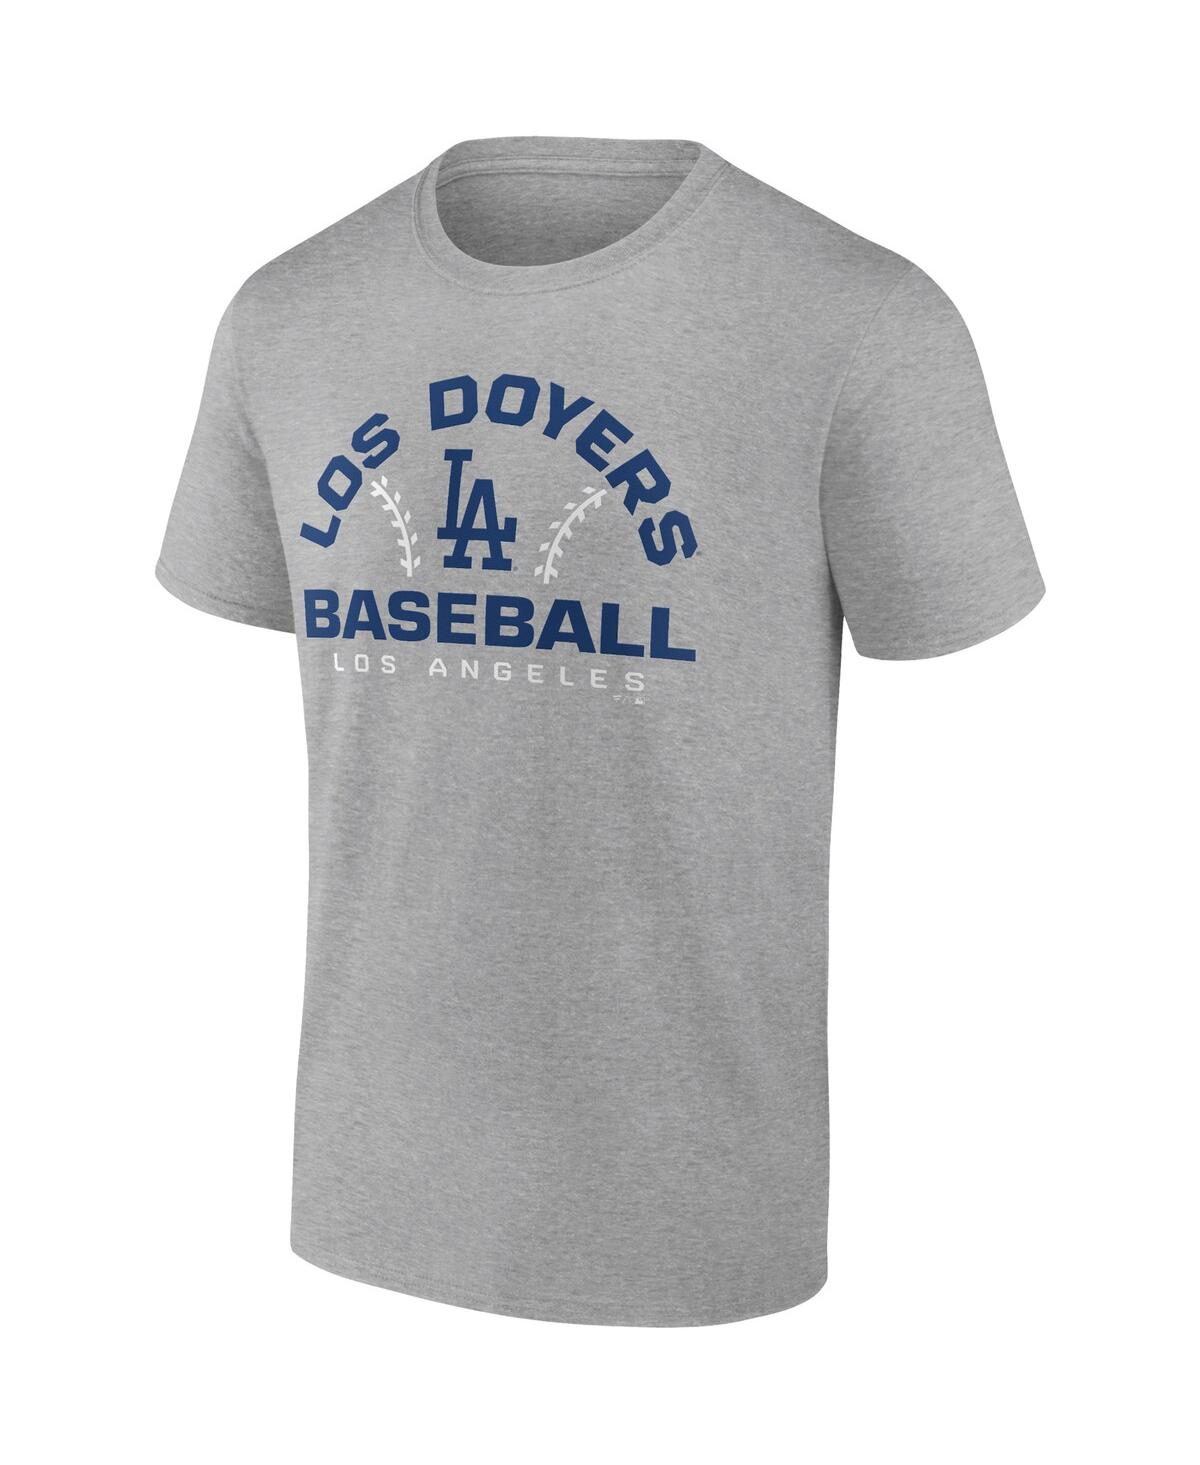 Shop Fanatics Men's  Heathered Gray Los Angeles Dodgers Iconic Go For Two T-shirt